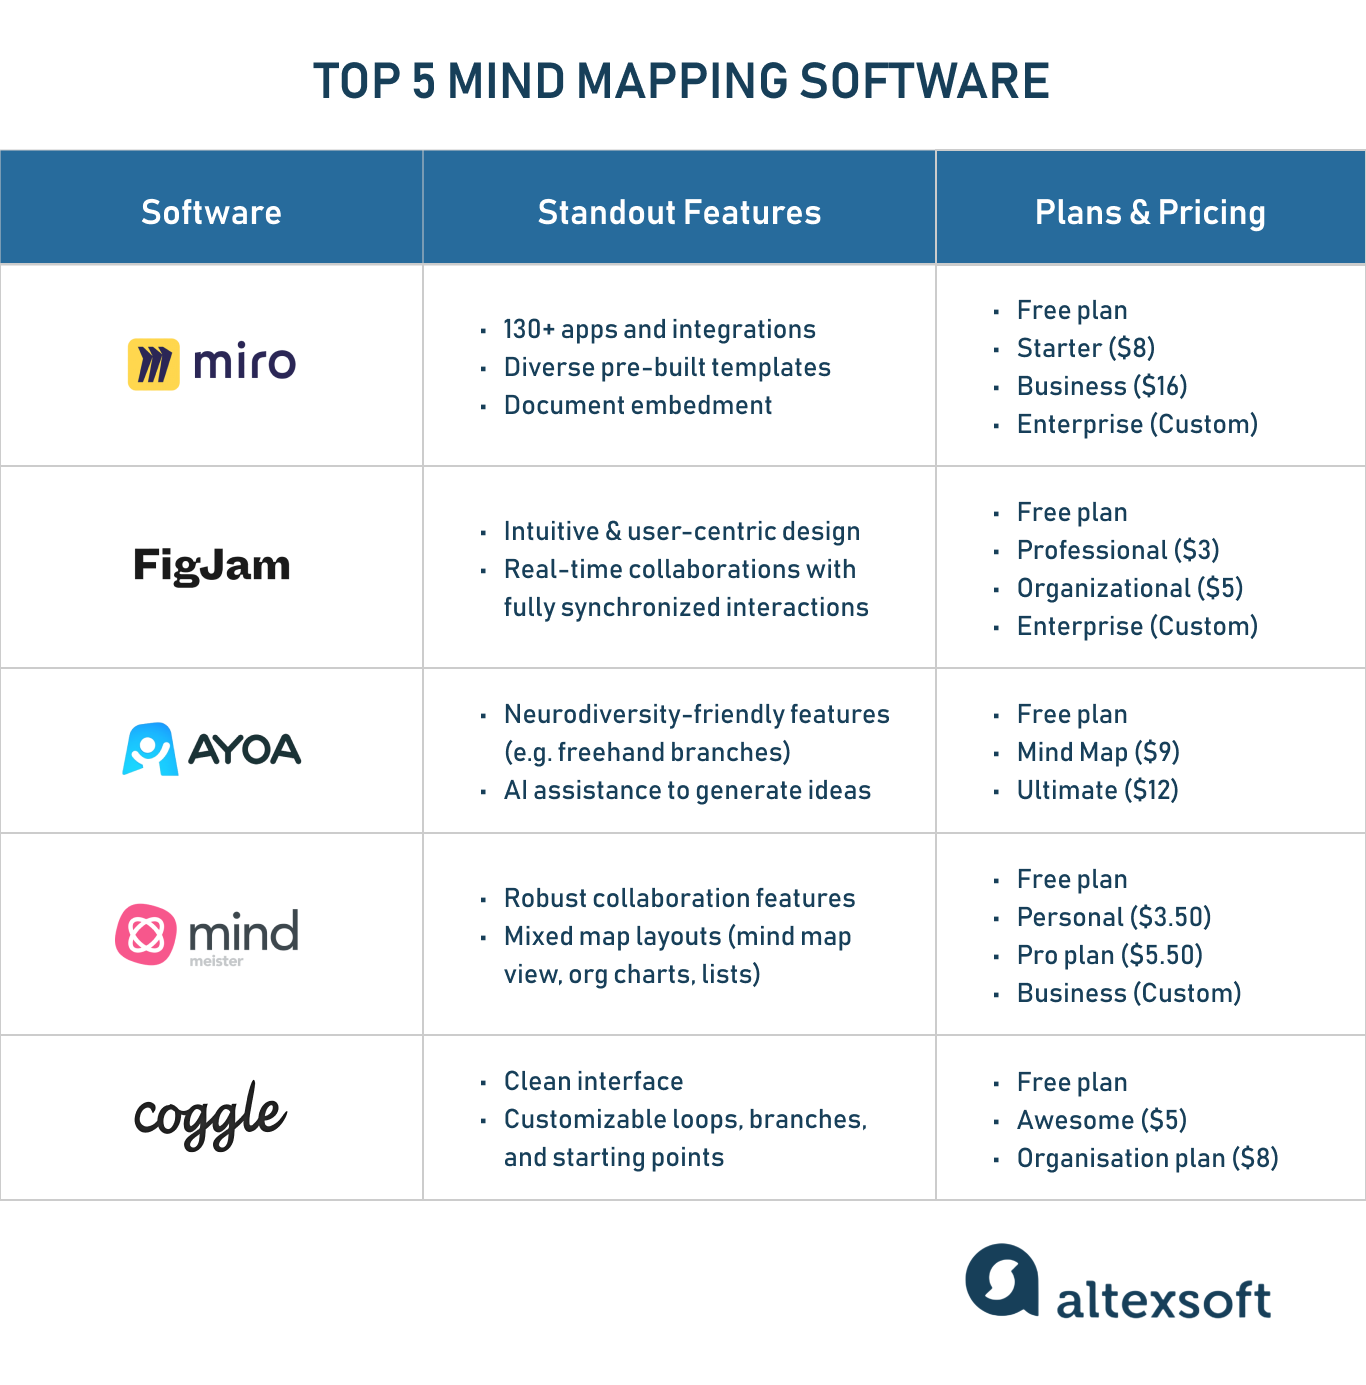 a table that shows a general overview of top 5 mind mapping software highlighting standout features and pricing plans of each tool